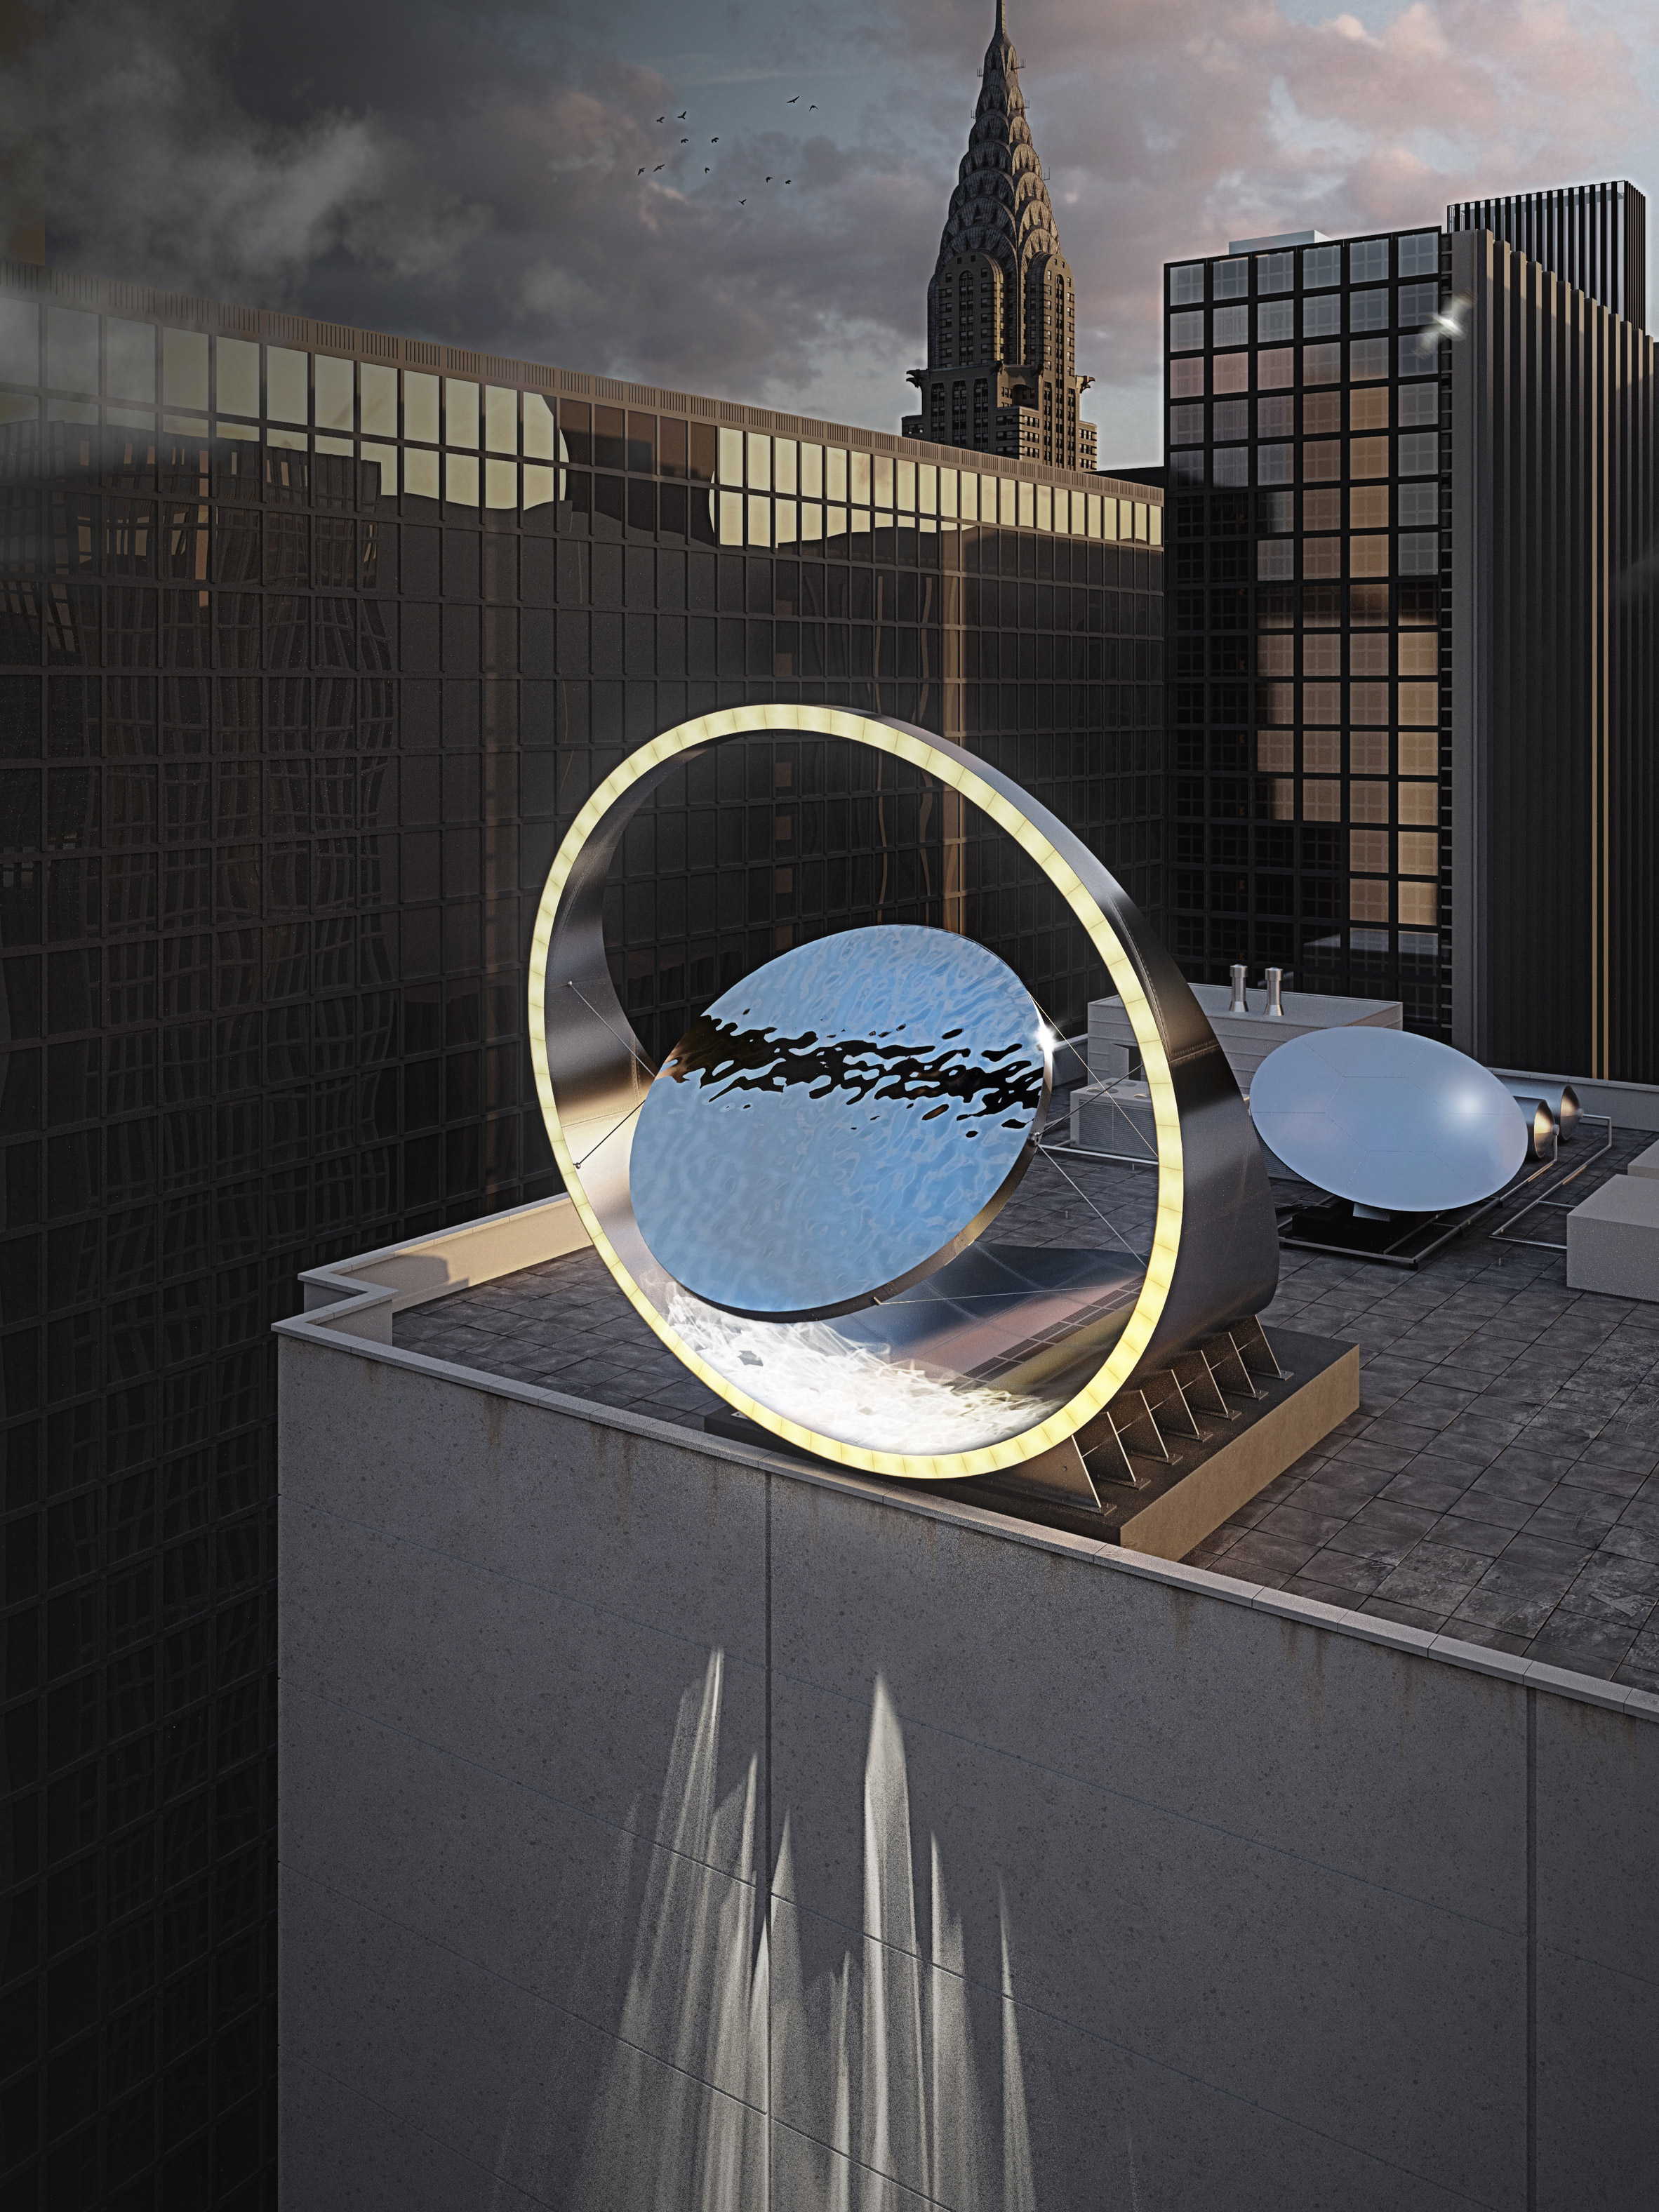 Haberdashery proposes huge urban reflectors to bring light into shaded streets